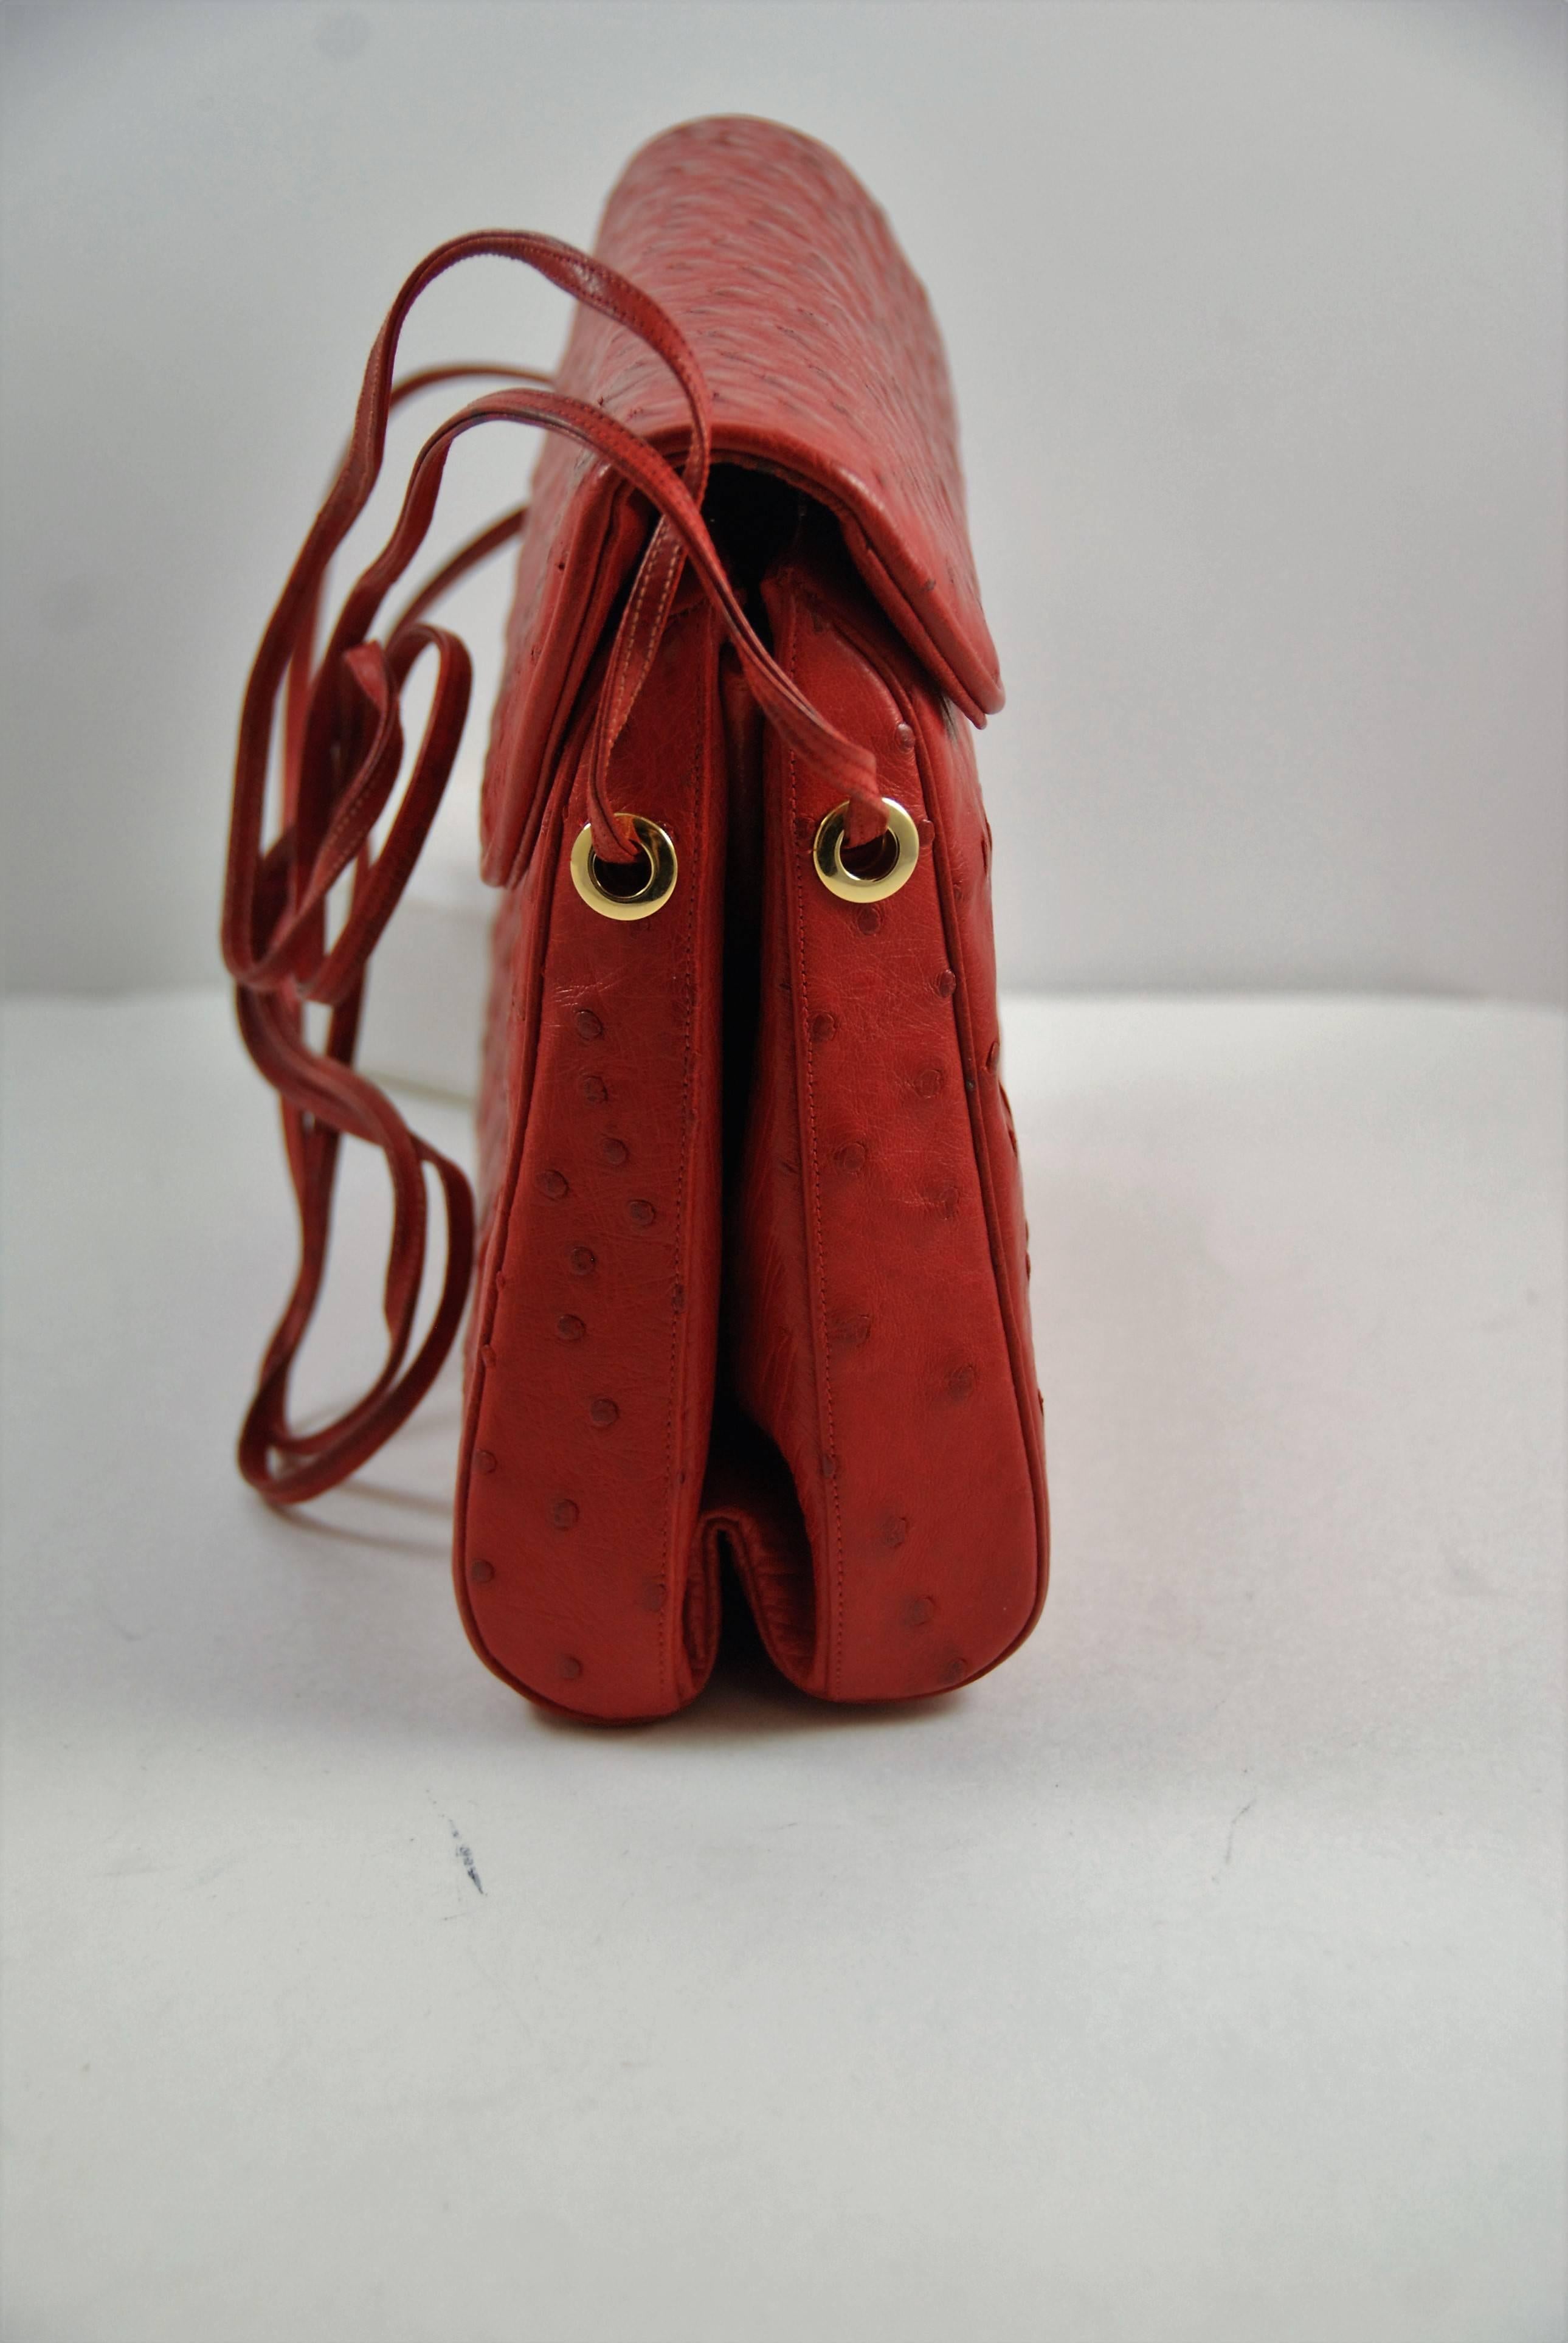 19802 Geranium Red Judith Leiber Ostrich Shoulder Bag In Excellent Condition For Sale In New York, NY